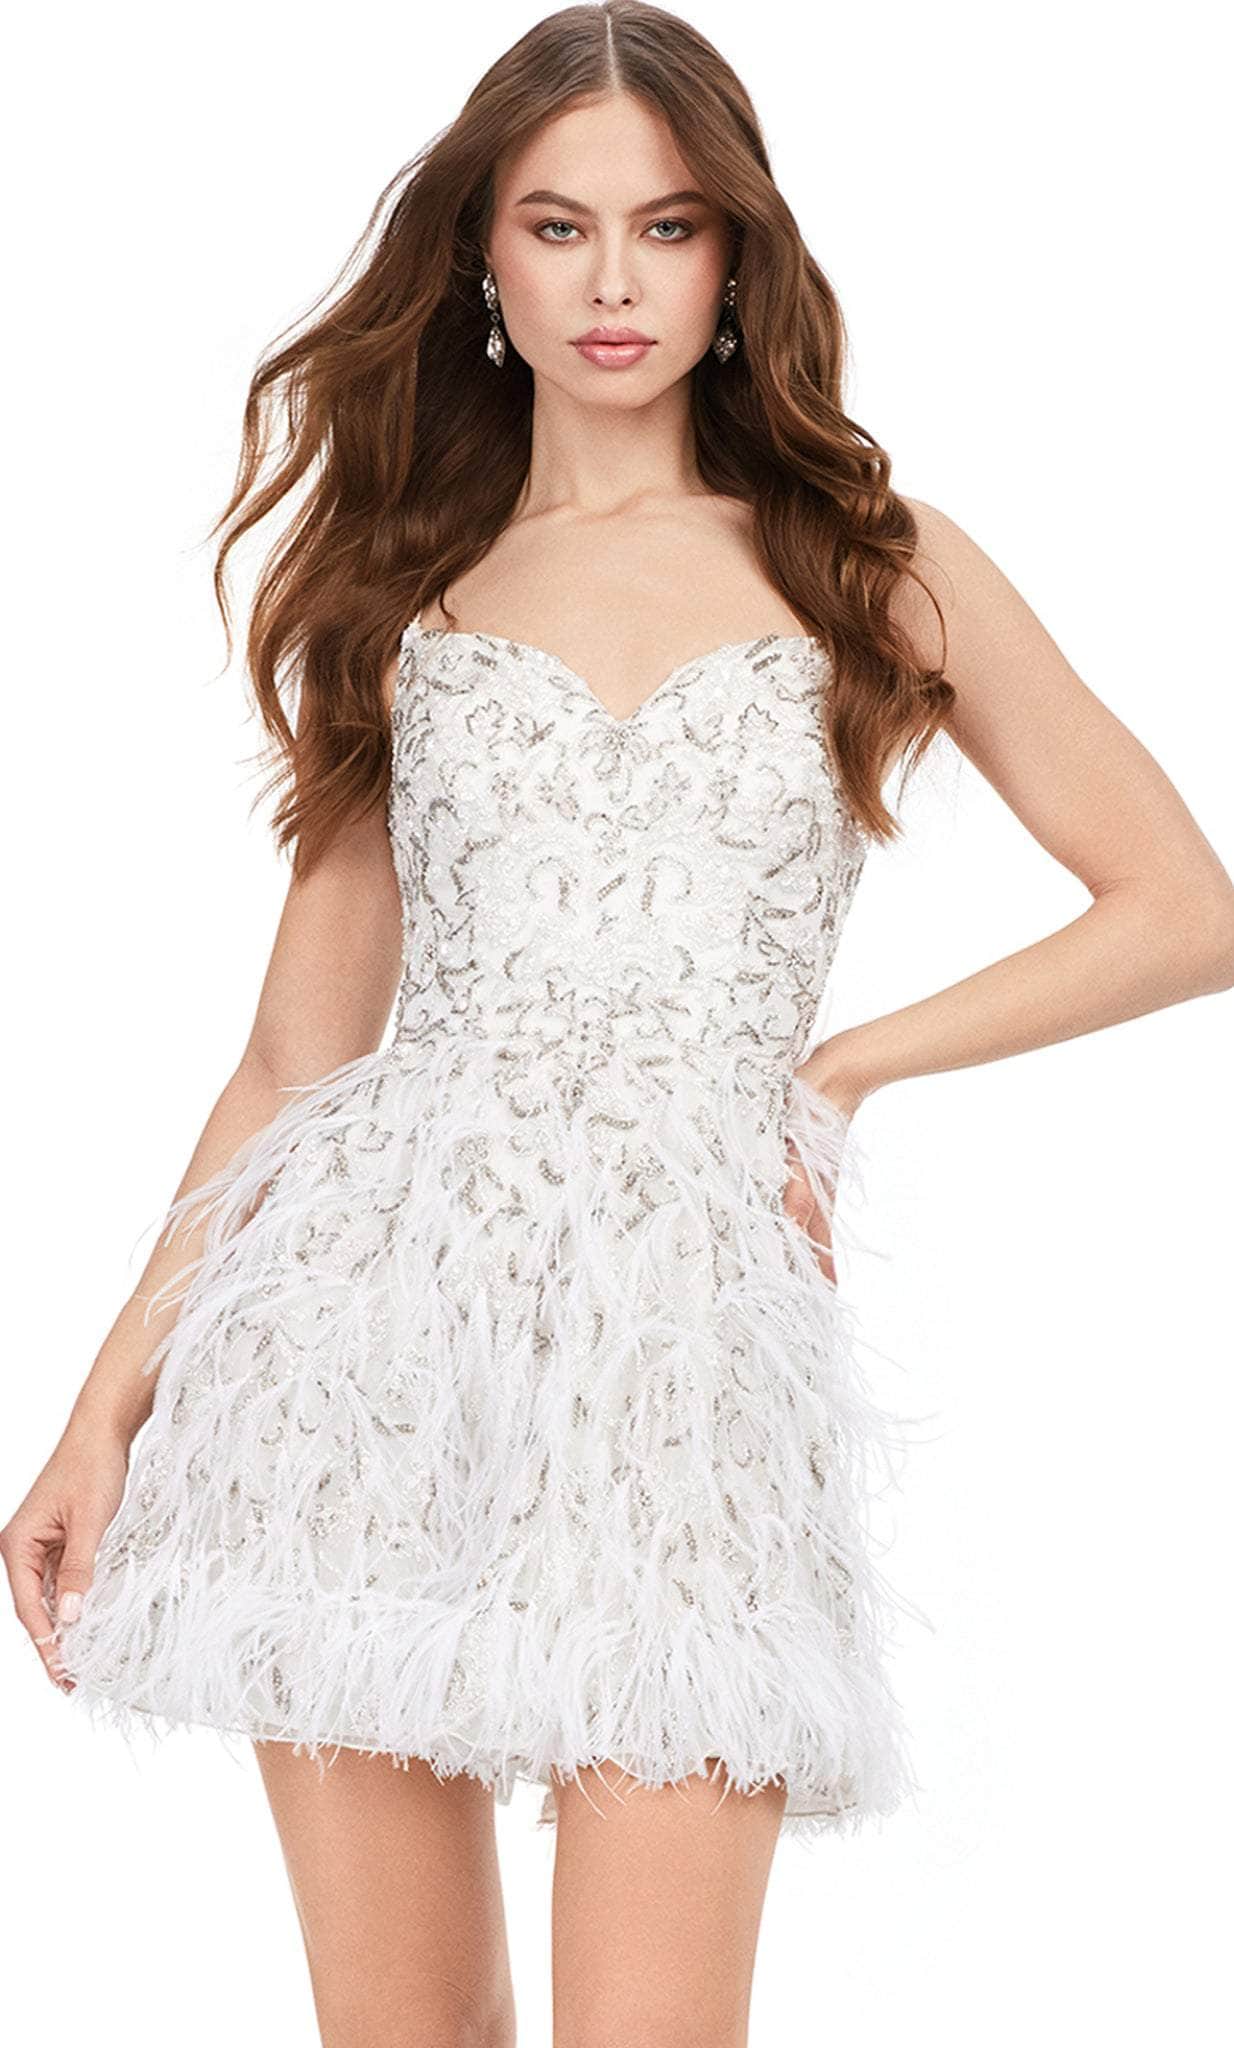 Image of Ashley Lauren 4604 - Beaded Feathers A-Line Cocktail Dress